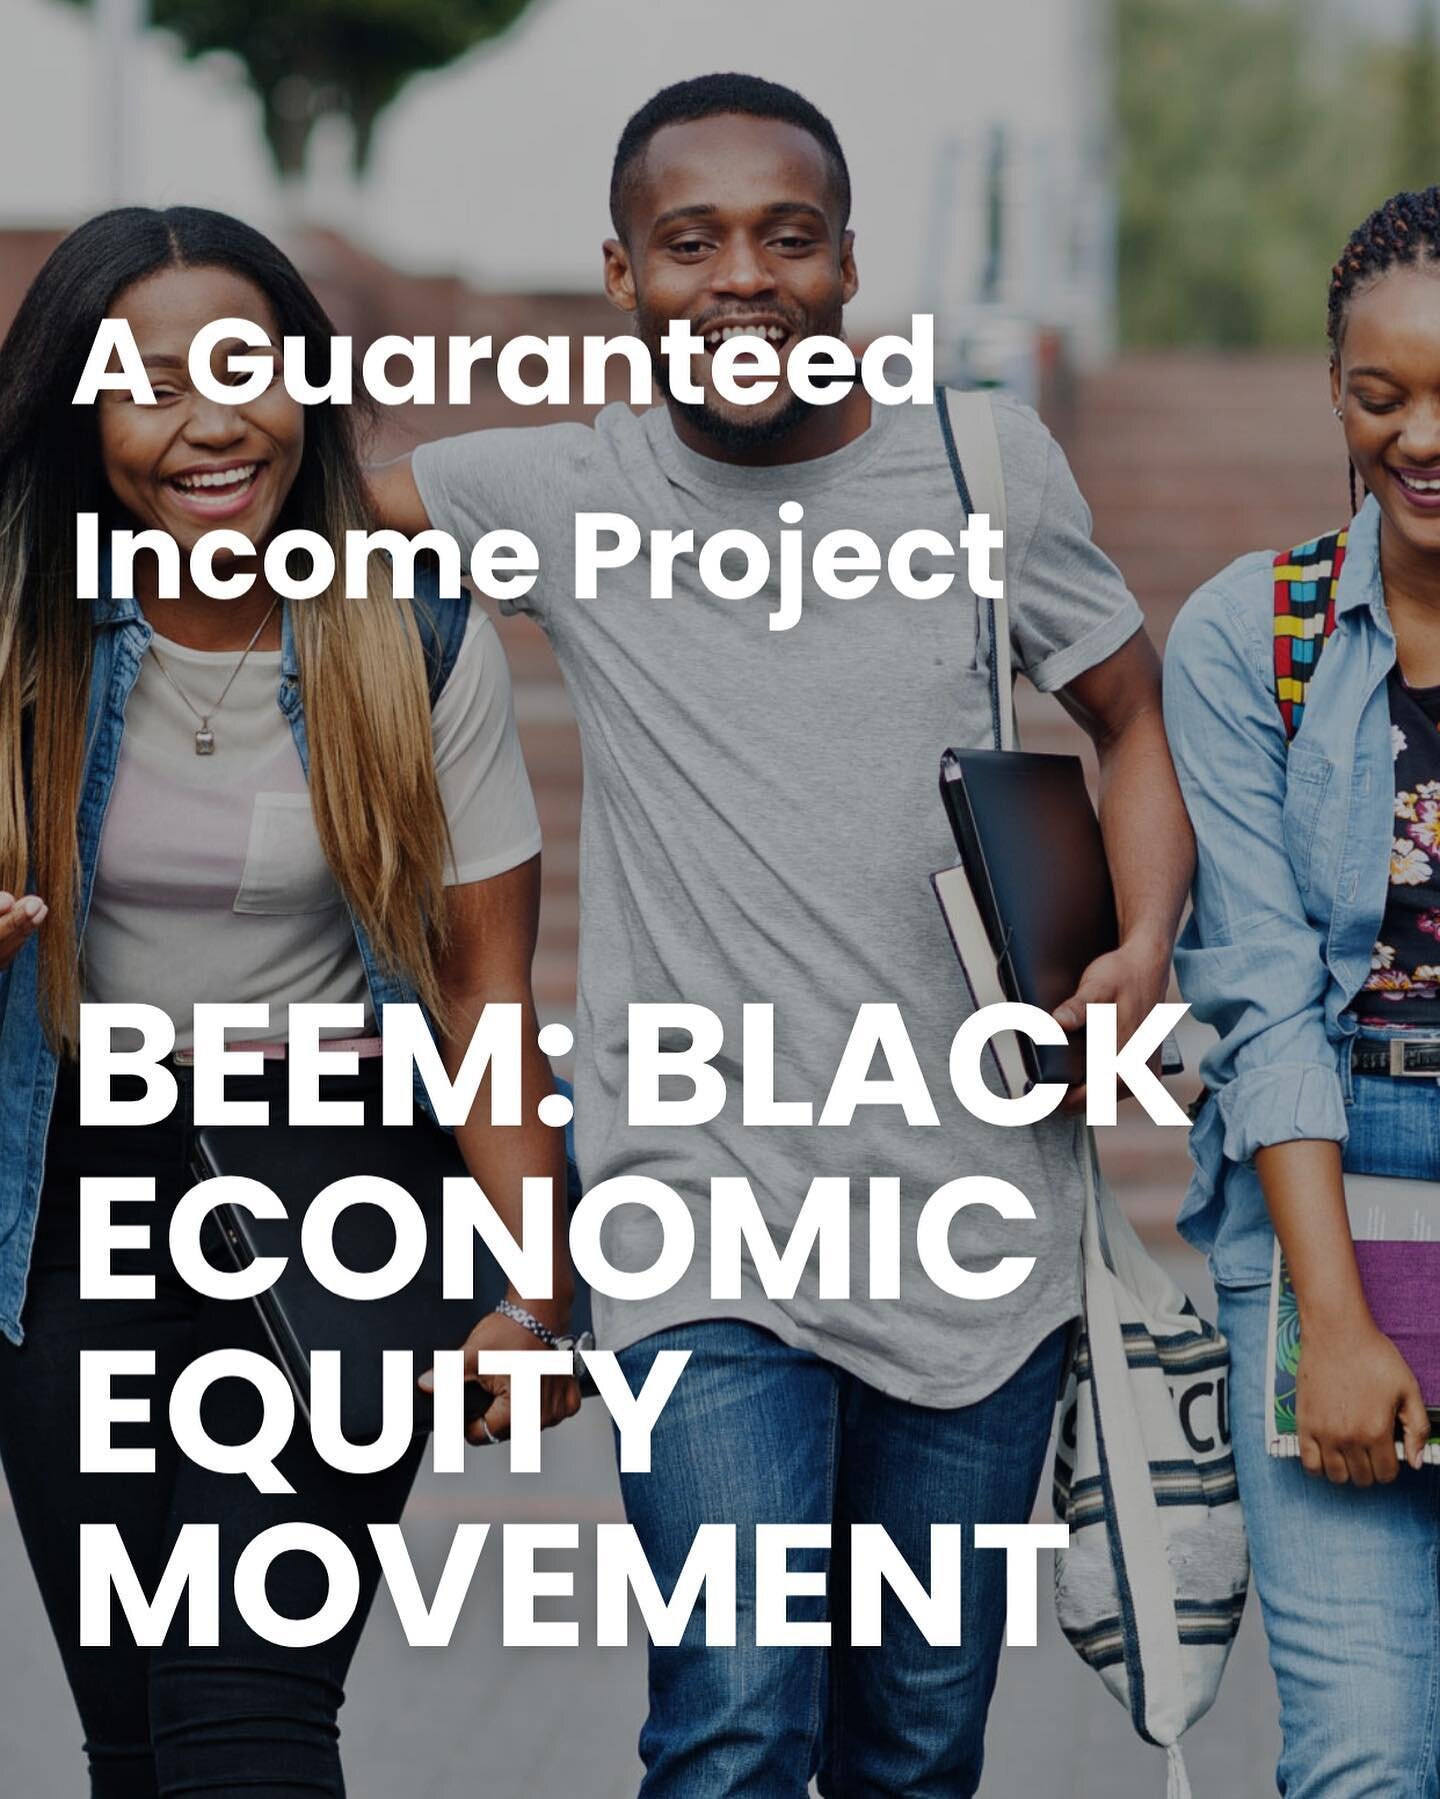 💴 💰 💵 ⁣
⁣
Link in bio!⁣
⁣
BEEM is a Guaranteed Income project for Black young adults in certain areas in San Francisco and Oakland.⁣
⁣
The Black Economic Equity Movement (BEEM) project is a Guaranteed Income project. Guaranteed Income is a tempora